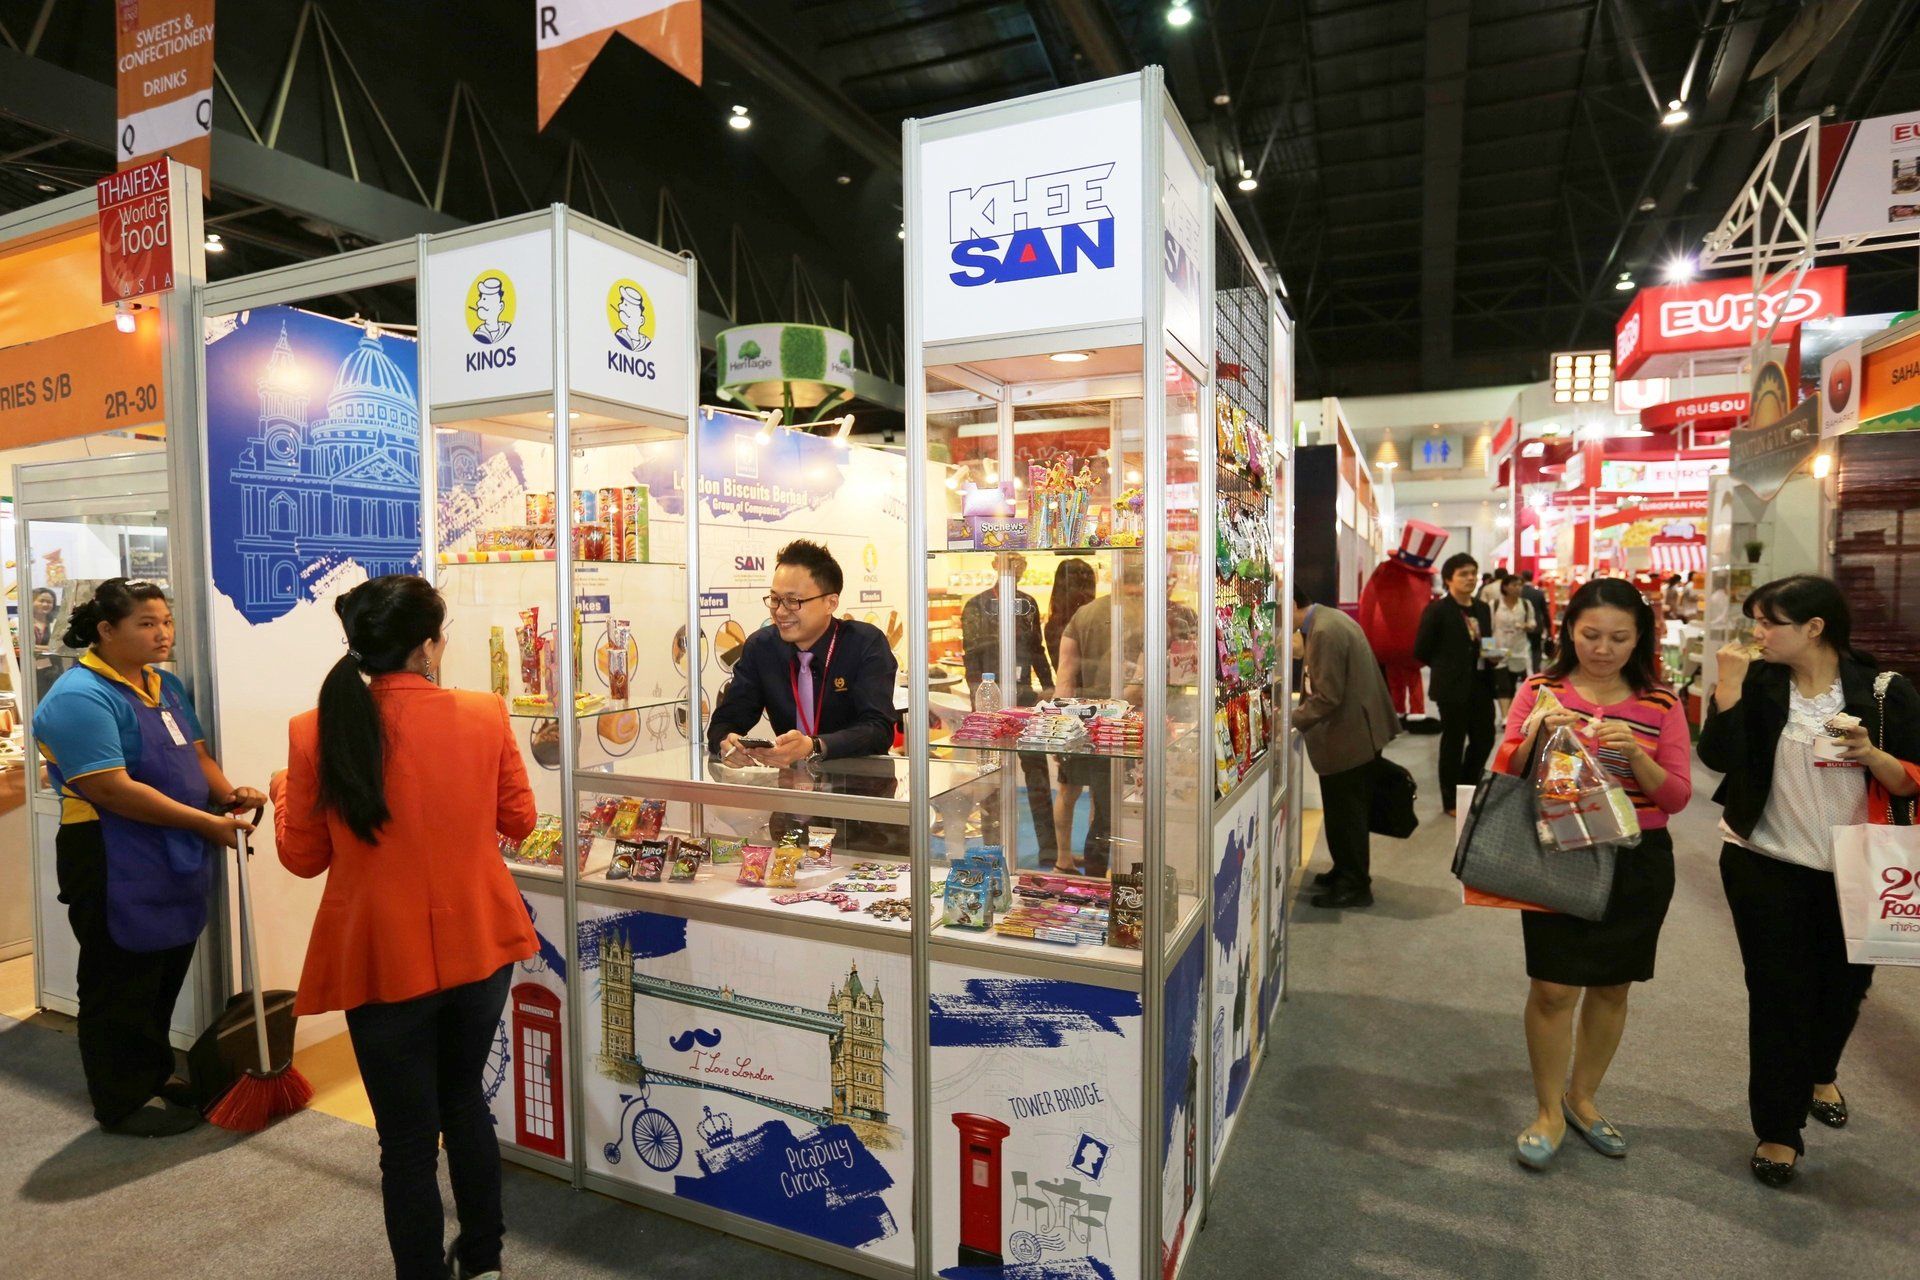 London Biscuits @ Thaifex 2014. Booth designed & built by Essential Global Fairs.